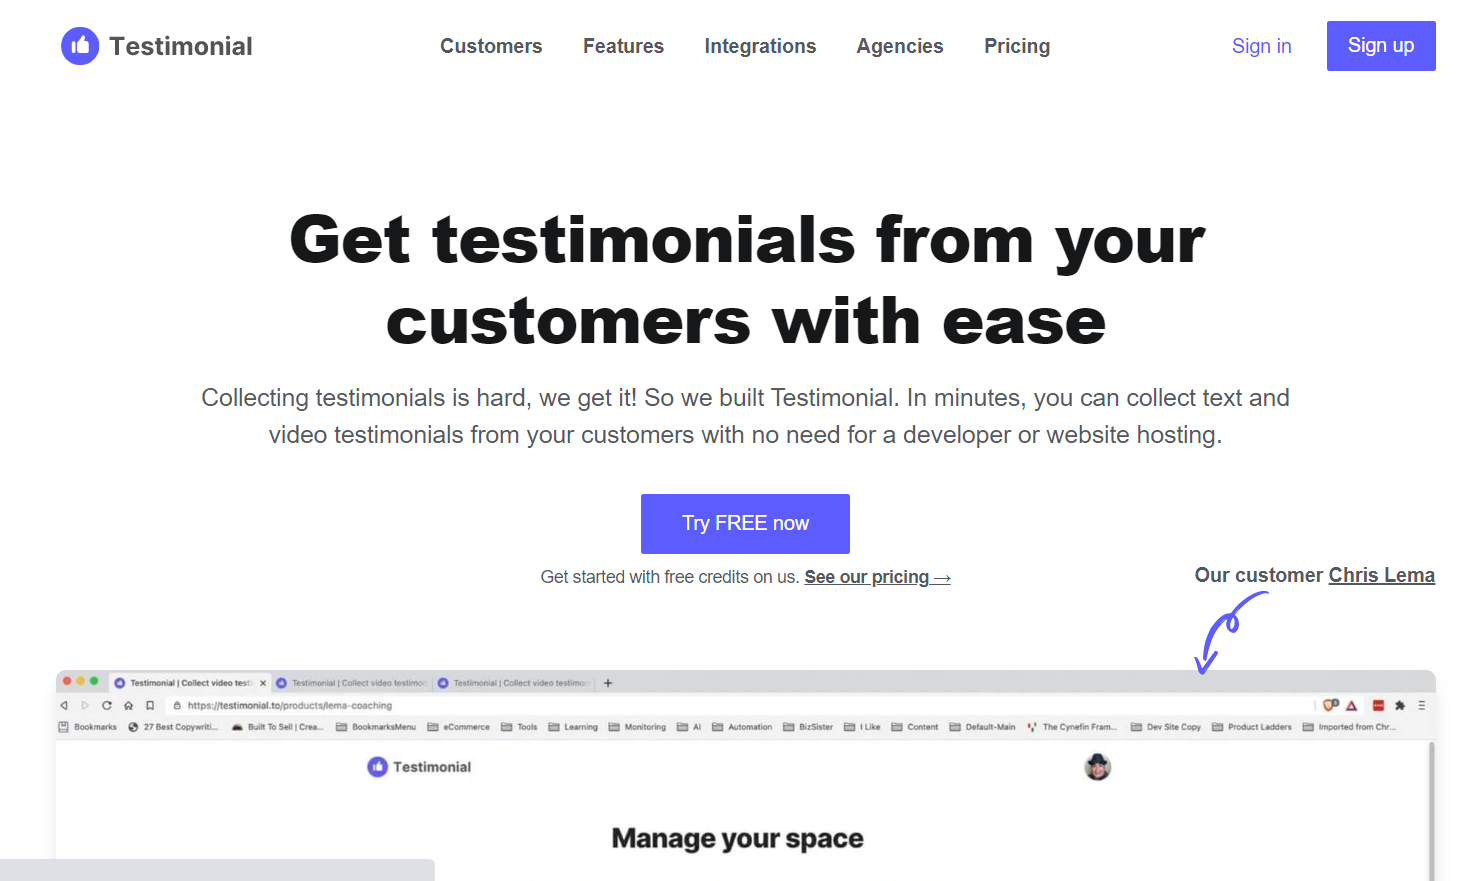 Testimonial.to homepage: Get testimonials from your customers with ease